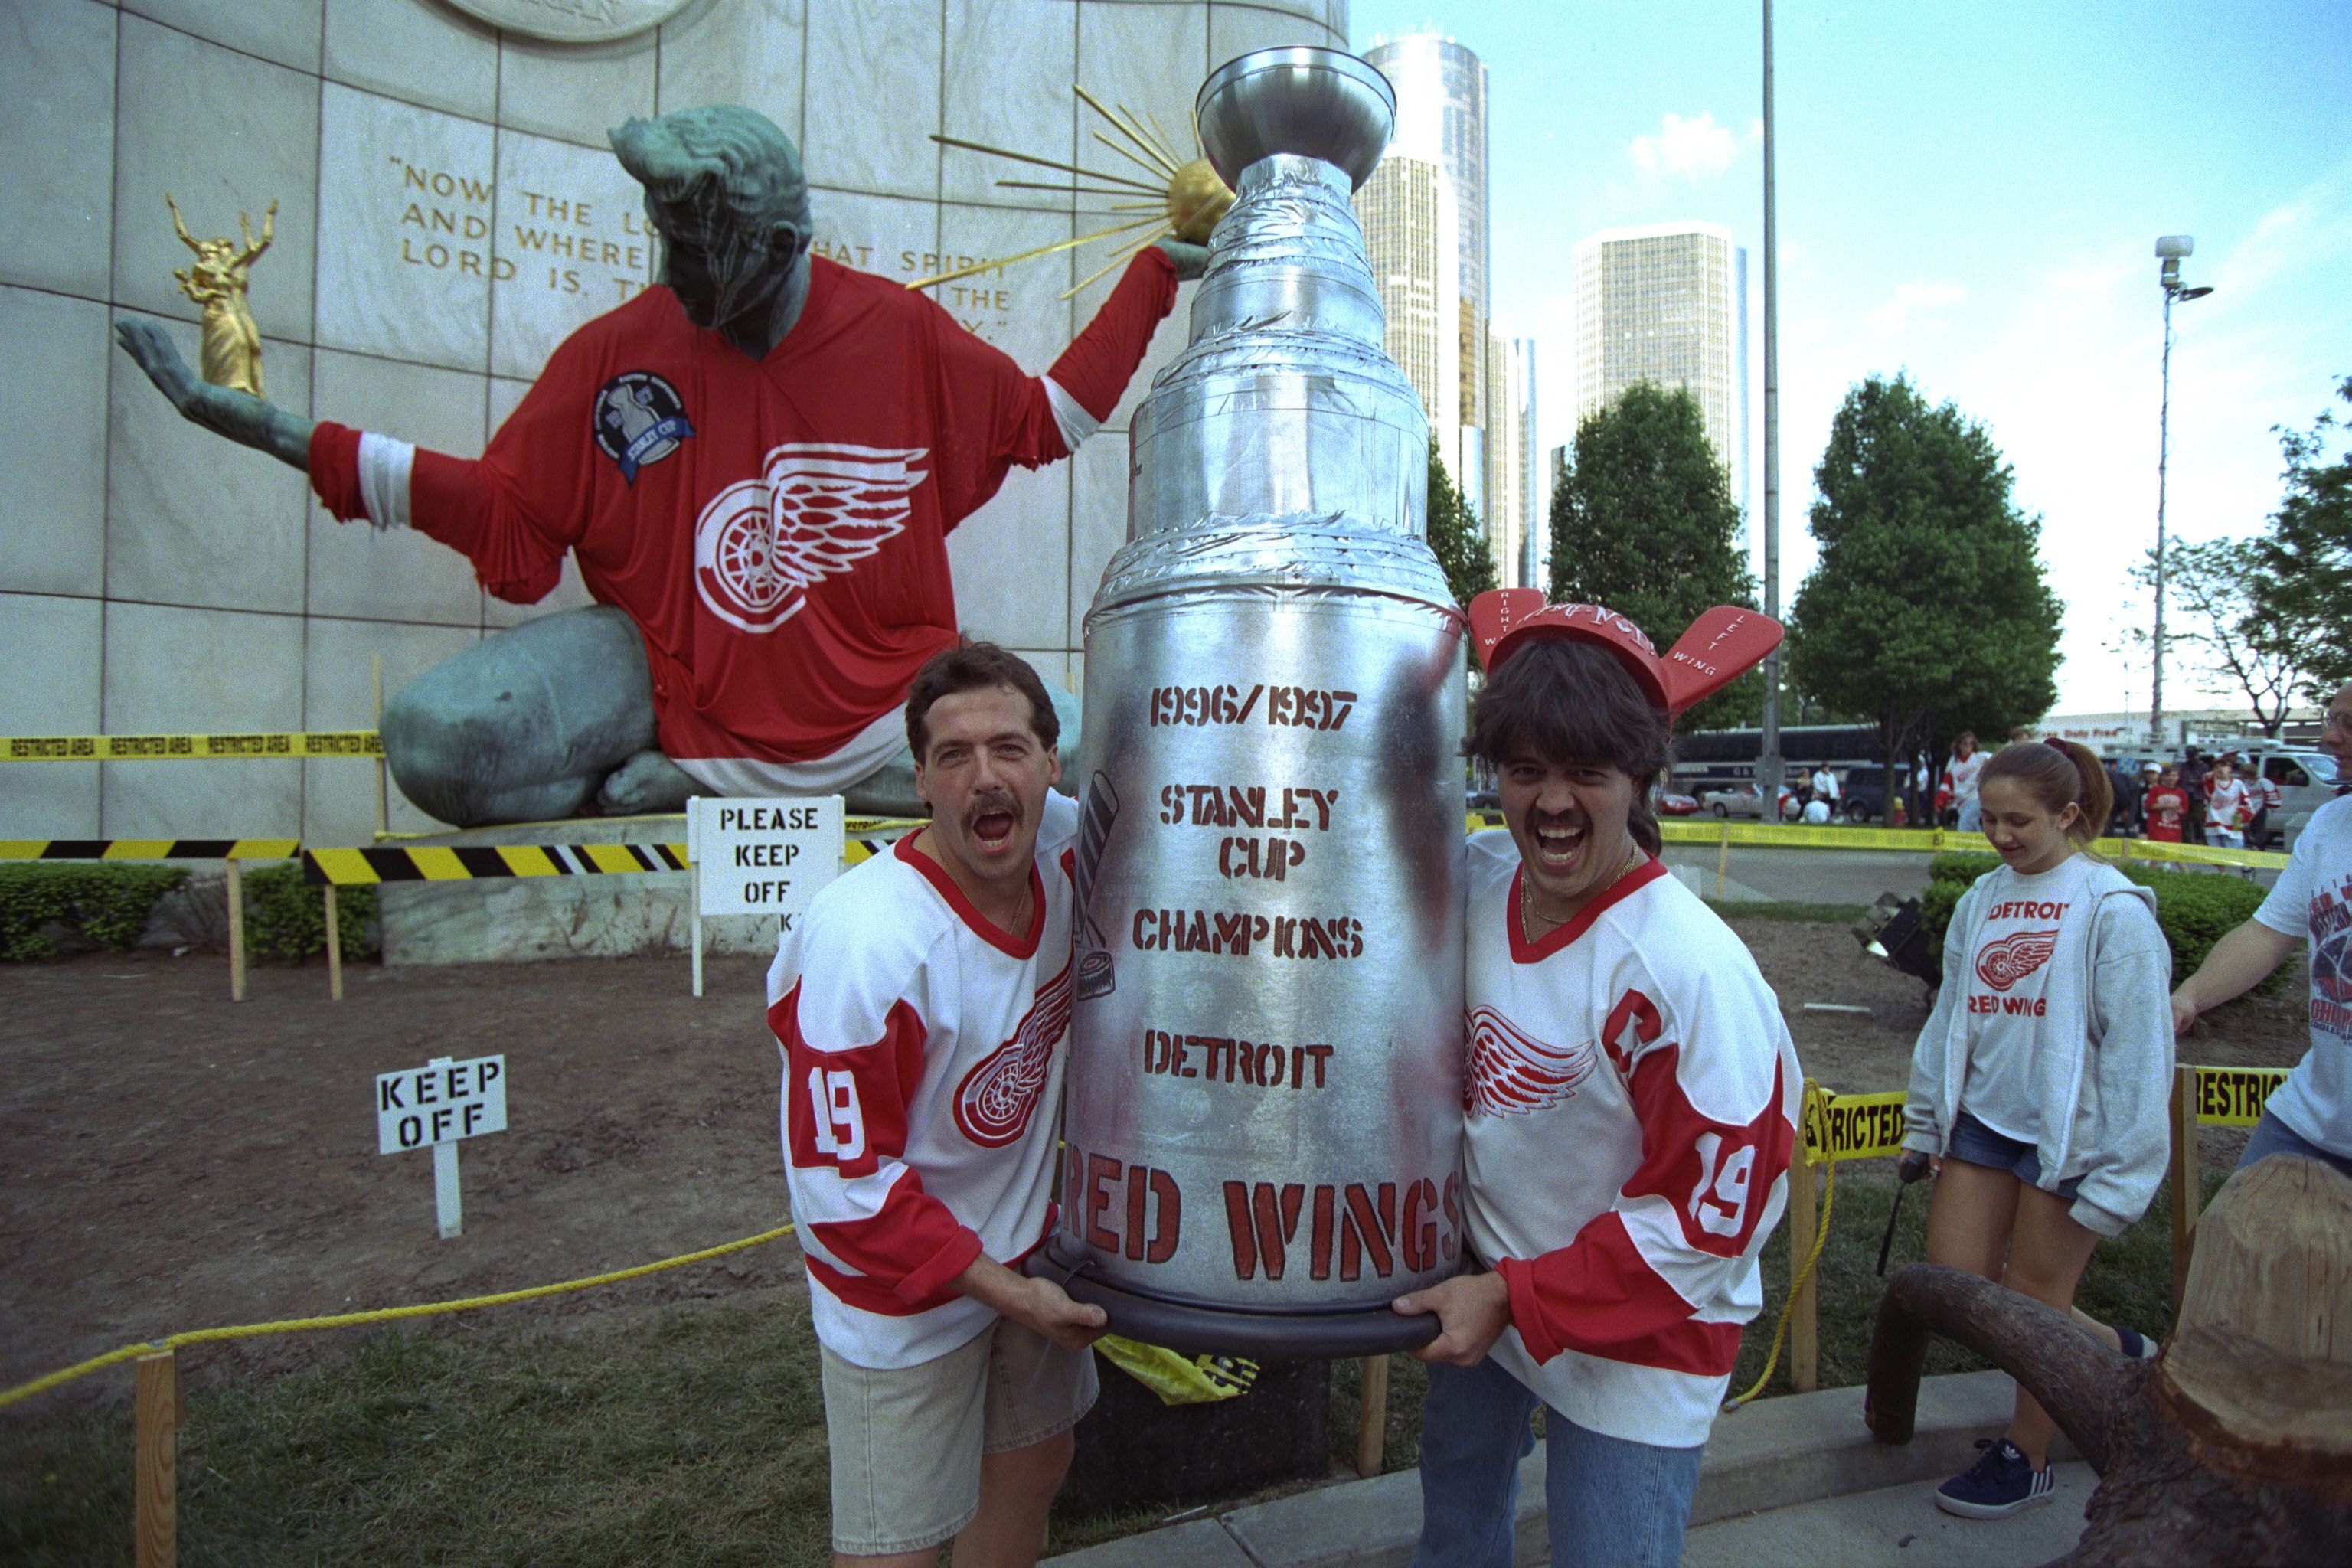 Detroit Red Wings fans celebrate the 1997 Stanley Cup Finals championship. The Red Wings beat the Flyers 2-1 in Detroit on June 7, 1997, to win their first league championship in 42 years. (Photo by Albert Dickson/Sporting News via Getty Images via Getty Images)